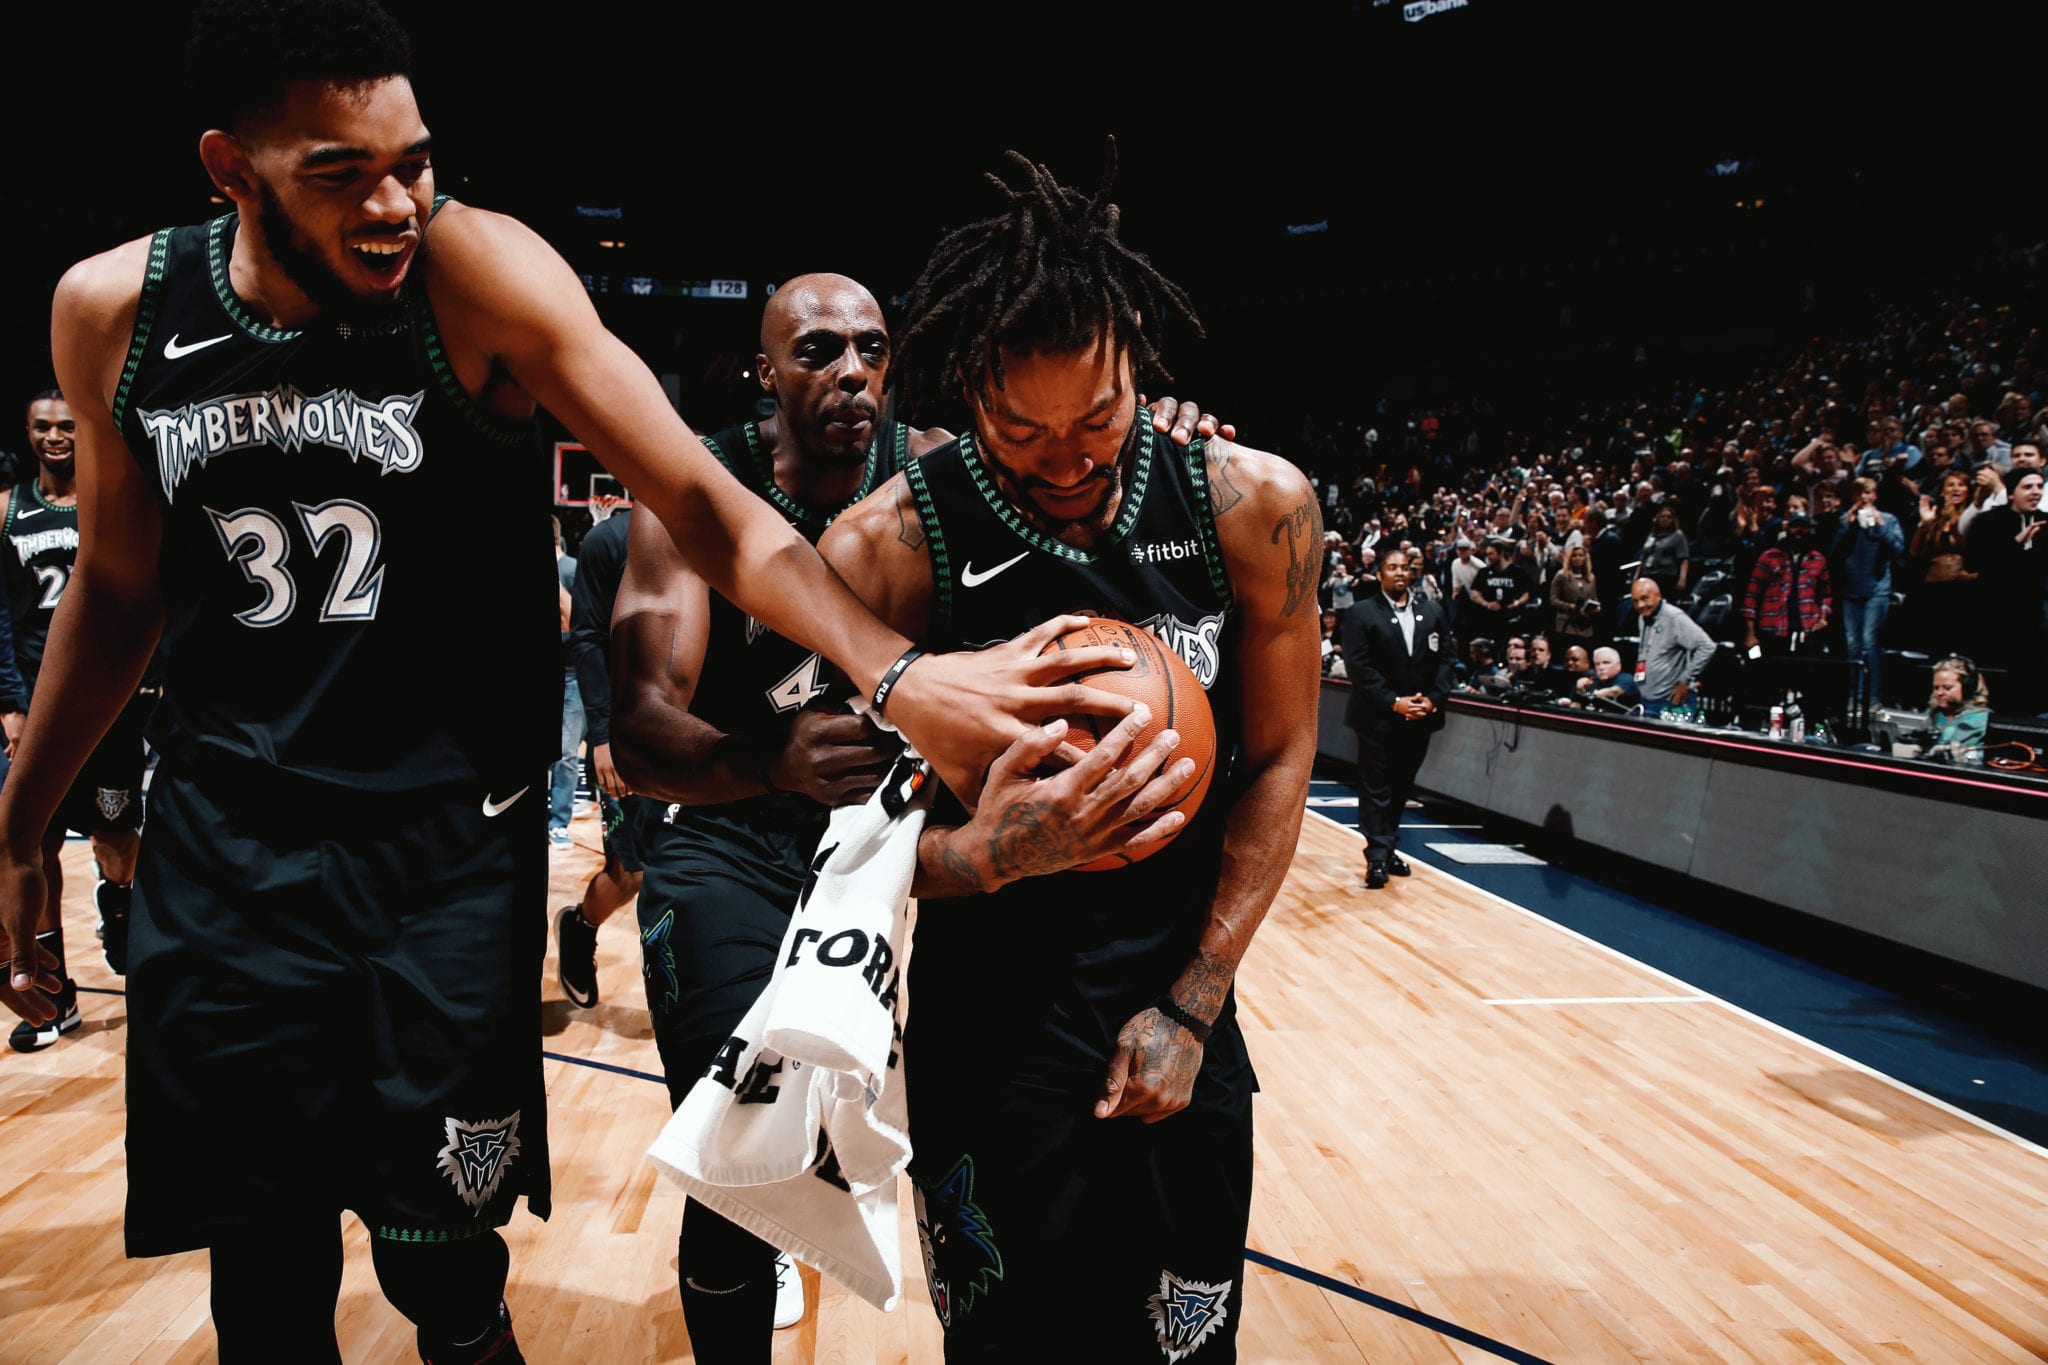 REDEMPTION: Derrick Rose breaks down in tears after overcoming years of devastating to score a career-high 50 points in a remarkable win over the Utah Jazz (October 31, 2018).